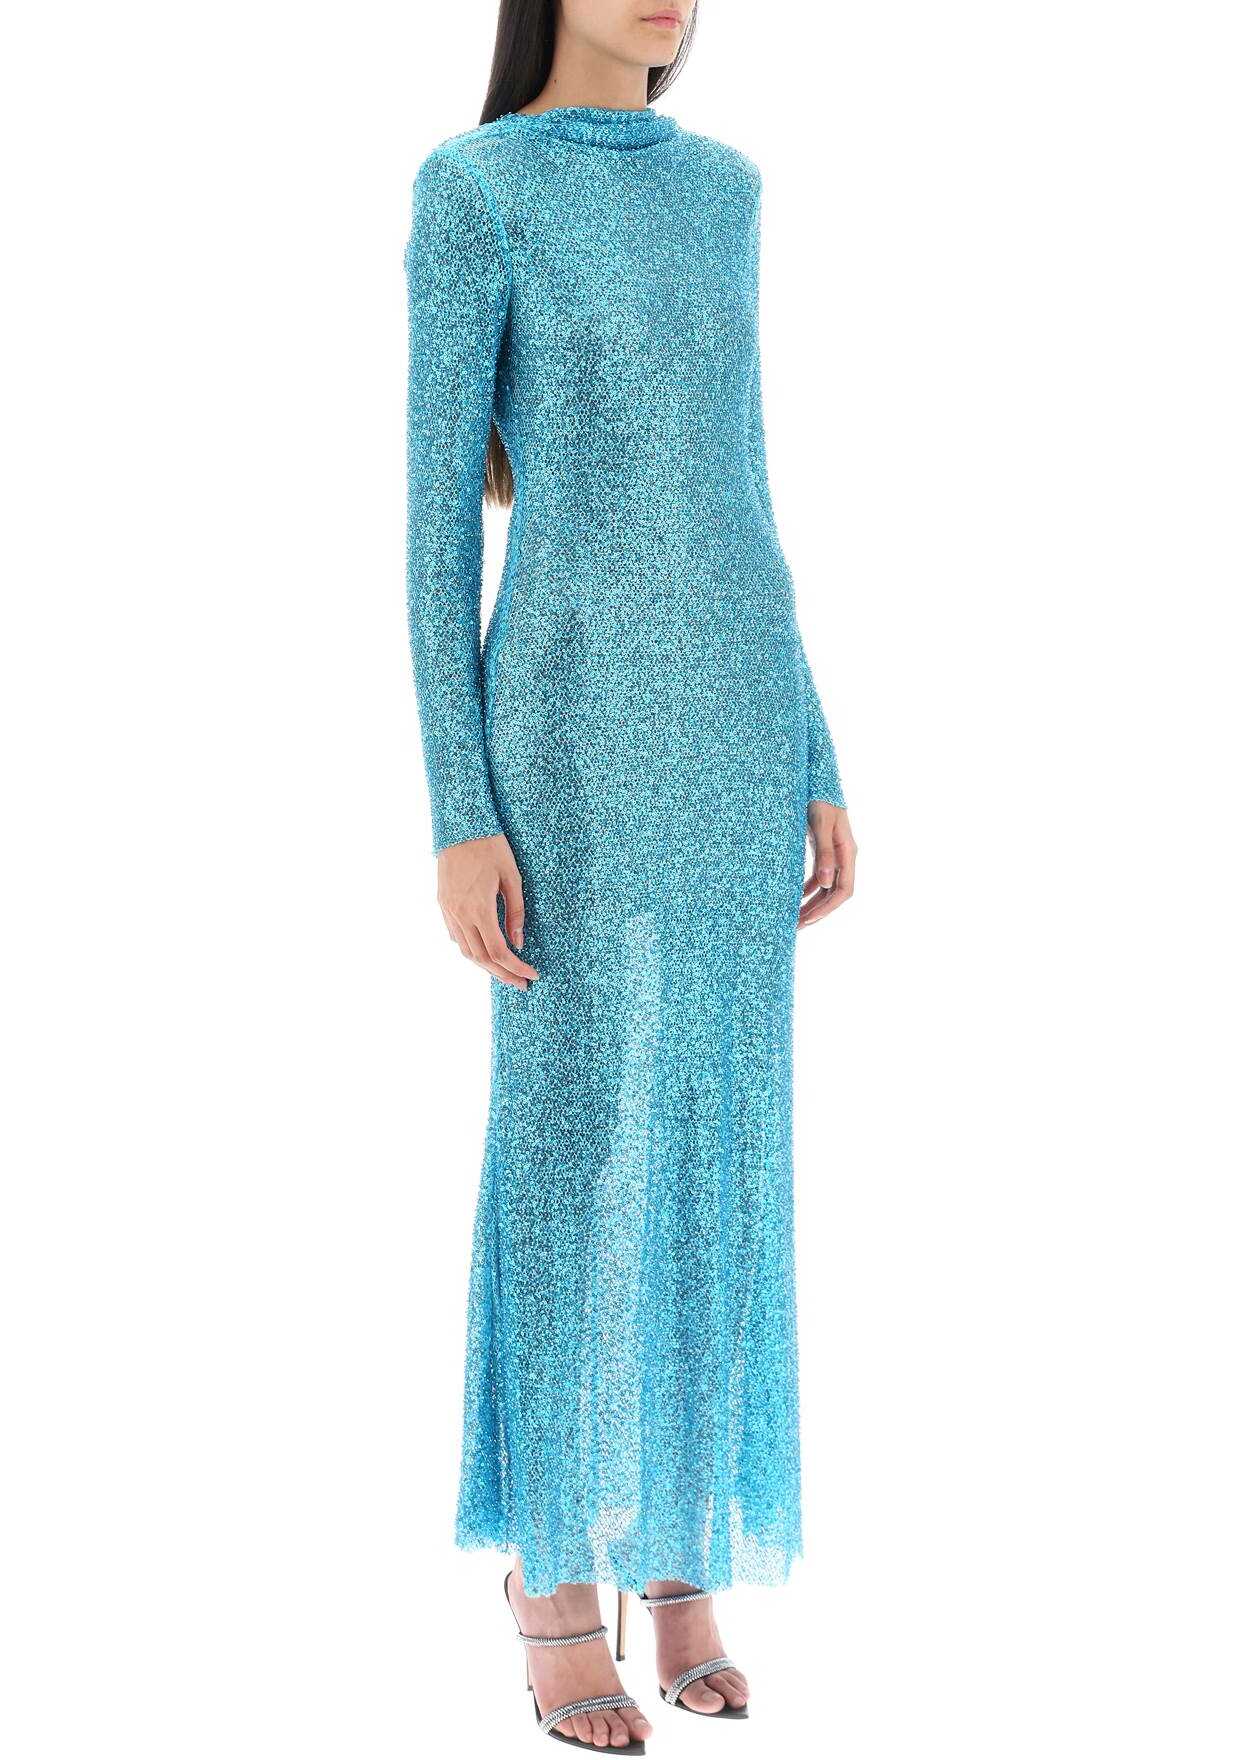 Self-Portrait Long-Sleeved Maxi Dress With Sequins And Beads BLUE image10